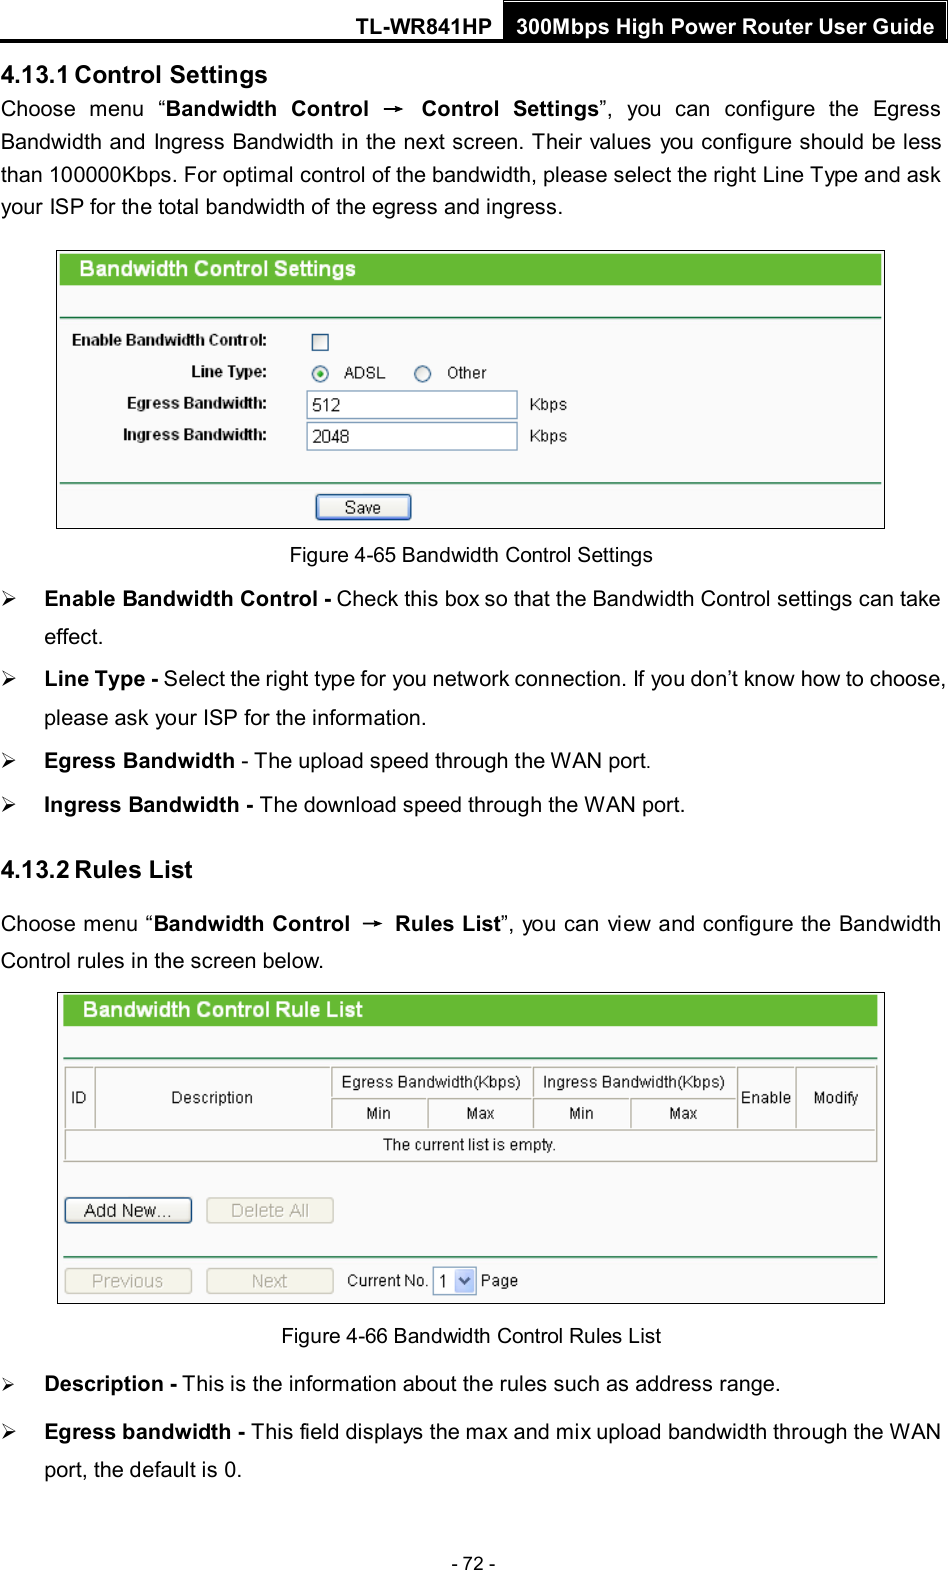 TL-WR841HP 300Mbps High Power Router User Guide  - 72 - 4.13.1 Control Settings Choose menu “Bandwidth Control → Control Settings”, you can configure the Egress Bandwidth and Ingress Bandwidth in the next screen. Their values  you configure should be less than 100000Kbps. For optimal control of the bandwidth, please select the right Line Type and ask your ISP for the total bandwidth of the egress and ingress.  Figure 4-65 Bandwidth Control Settings  Enable Bandwidth Control - Check this box so that the Bandwidth Control settings can take effect.  Line Type - Select the right type for you network connection. If you don’t know how to choose, please ask your ISP for the information.  Egress Bandwidth - The upload speed through the WAN port.  Ingress Bandwidth - The download speed through the WAN port. 4.13.2 Rules List Choose menu “Bandwidth Control  → Rules List”, you can view and configure the Bandwidth Control rules in the screen below.  Figure 4-66 Bandwidth Control Rules List  Description - This is the information about the rules such as address range.  Egress bandwidth - This field displays the max and mix upload bandwidth through the WAN port, the default is 0. 